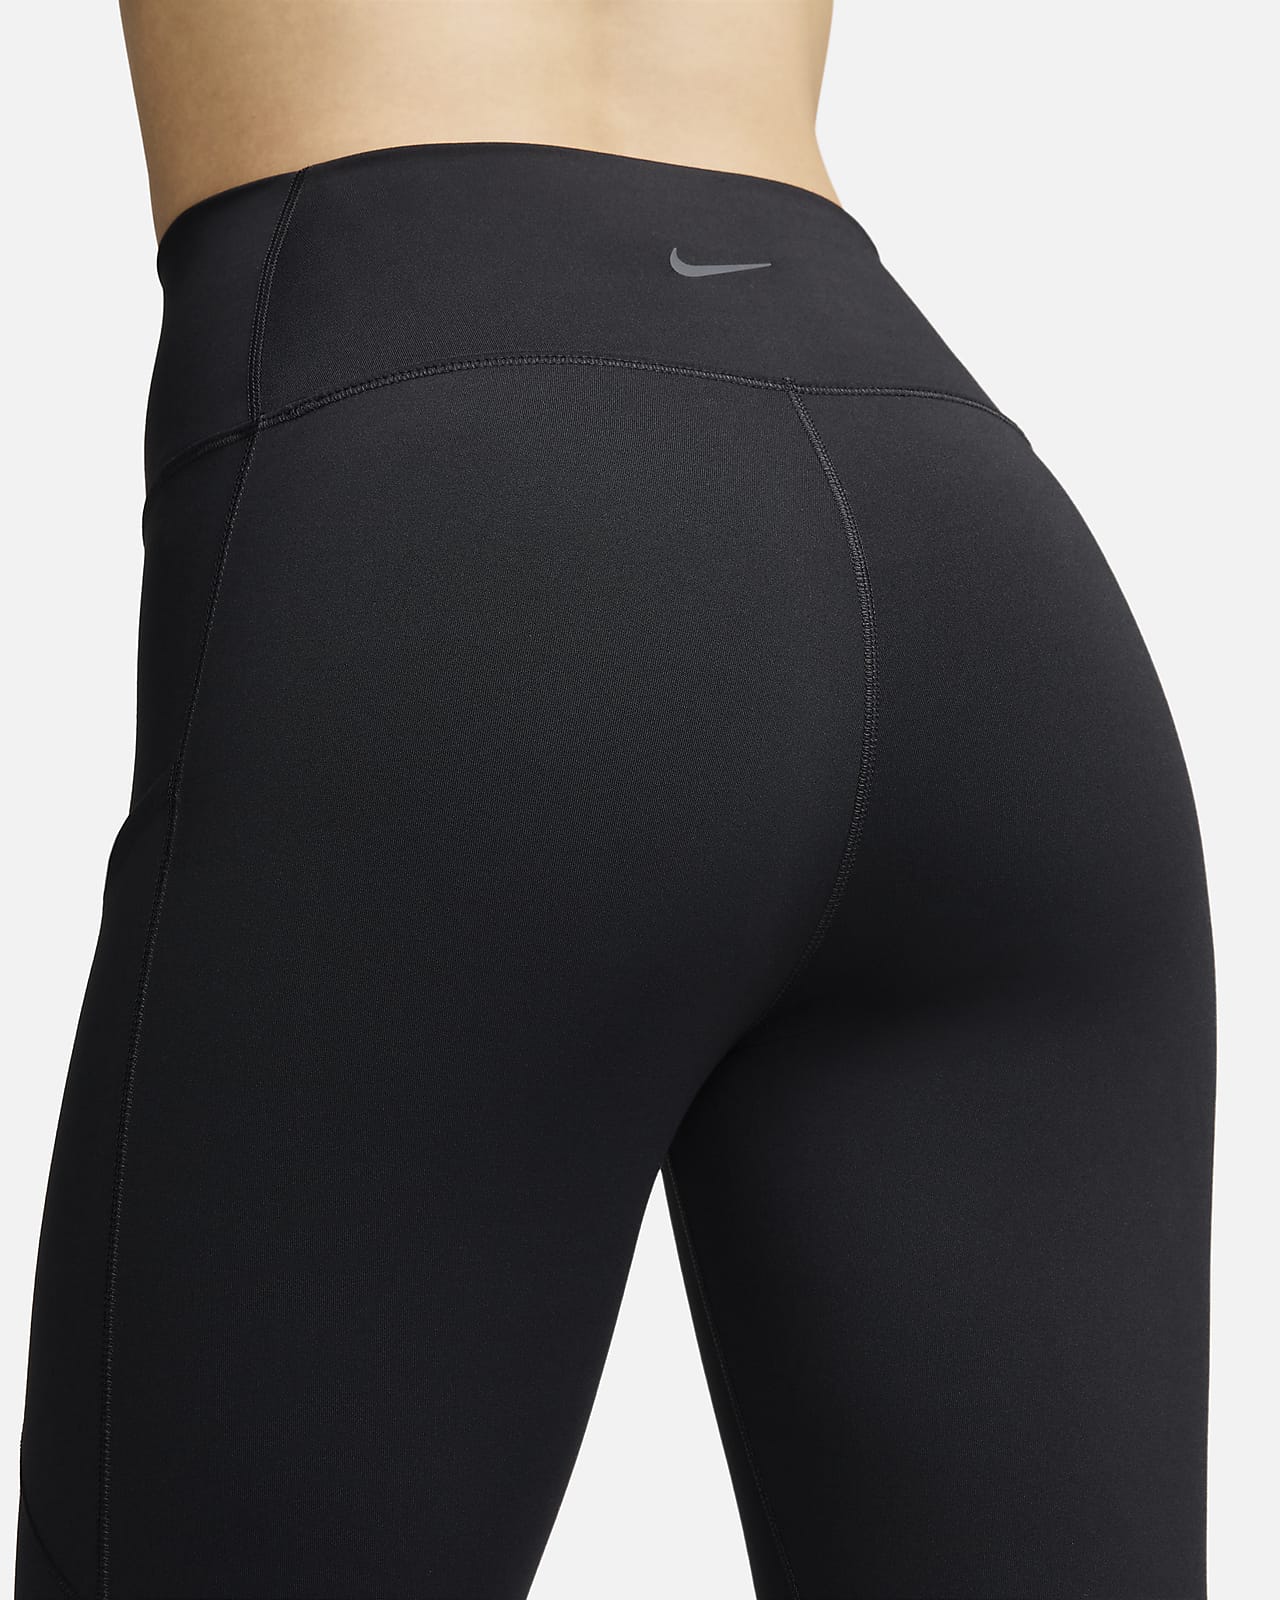 Nike Pro Women's High-Waisted 7/8 Leggings with Pockets Small at